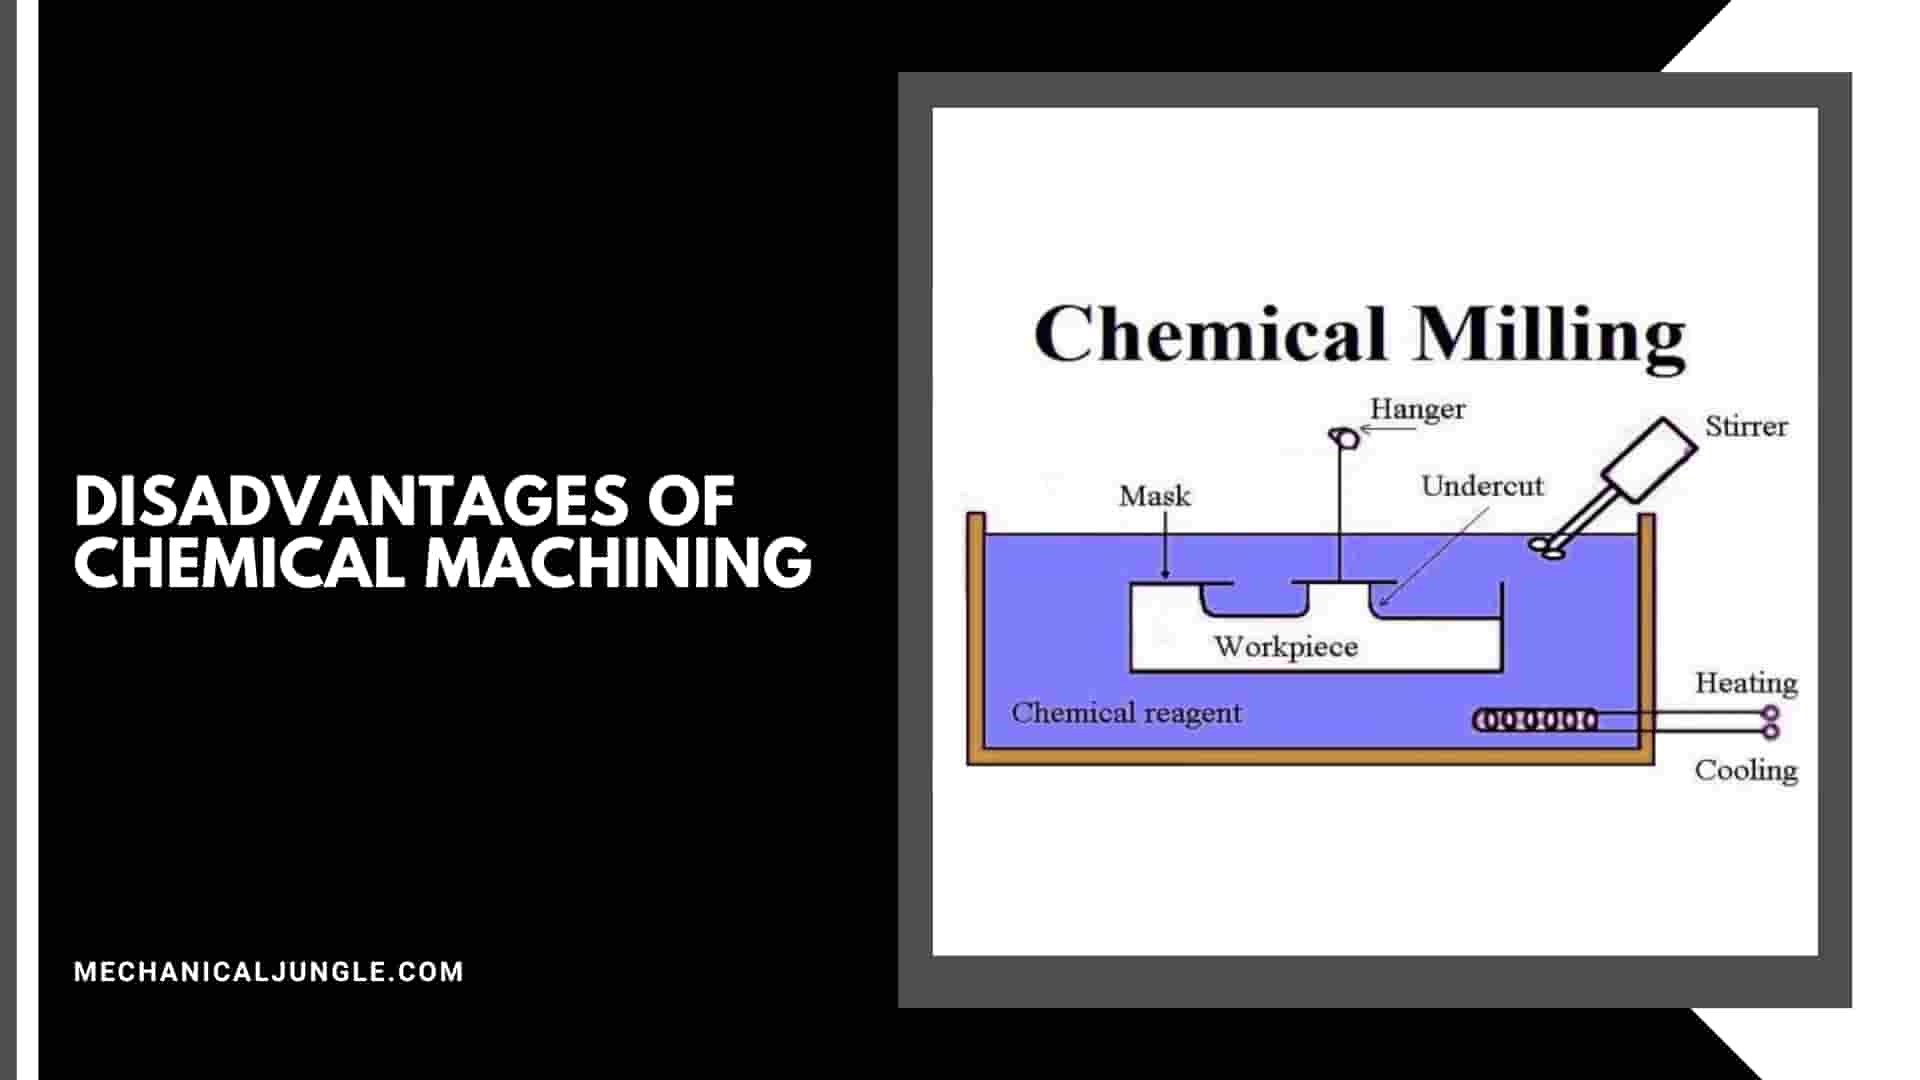 Disadvantages of Chemical Machining